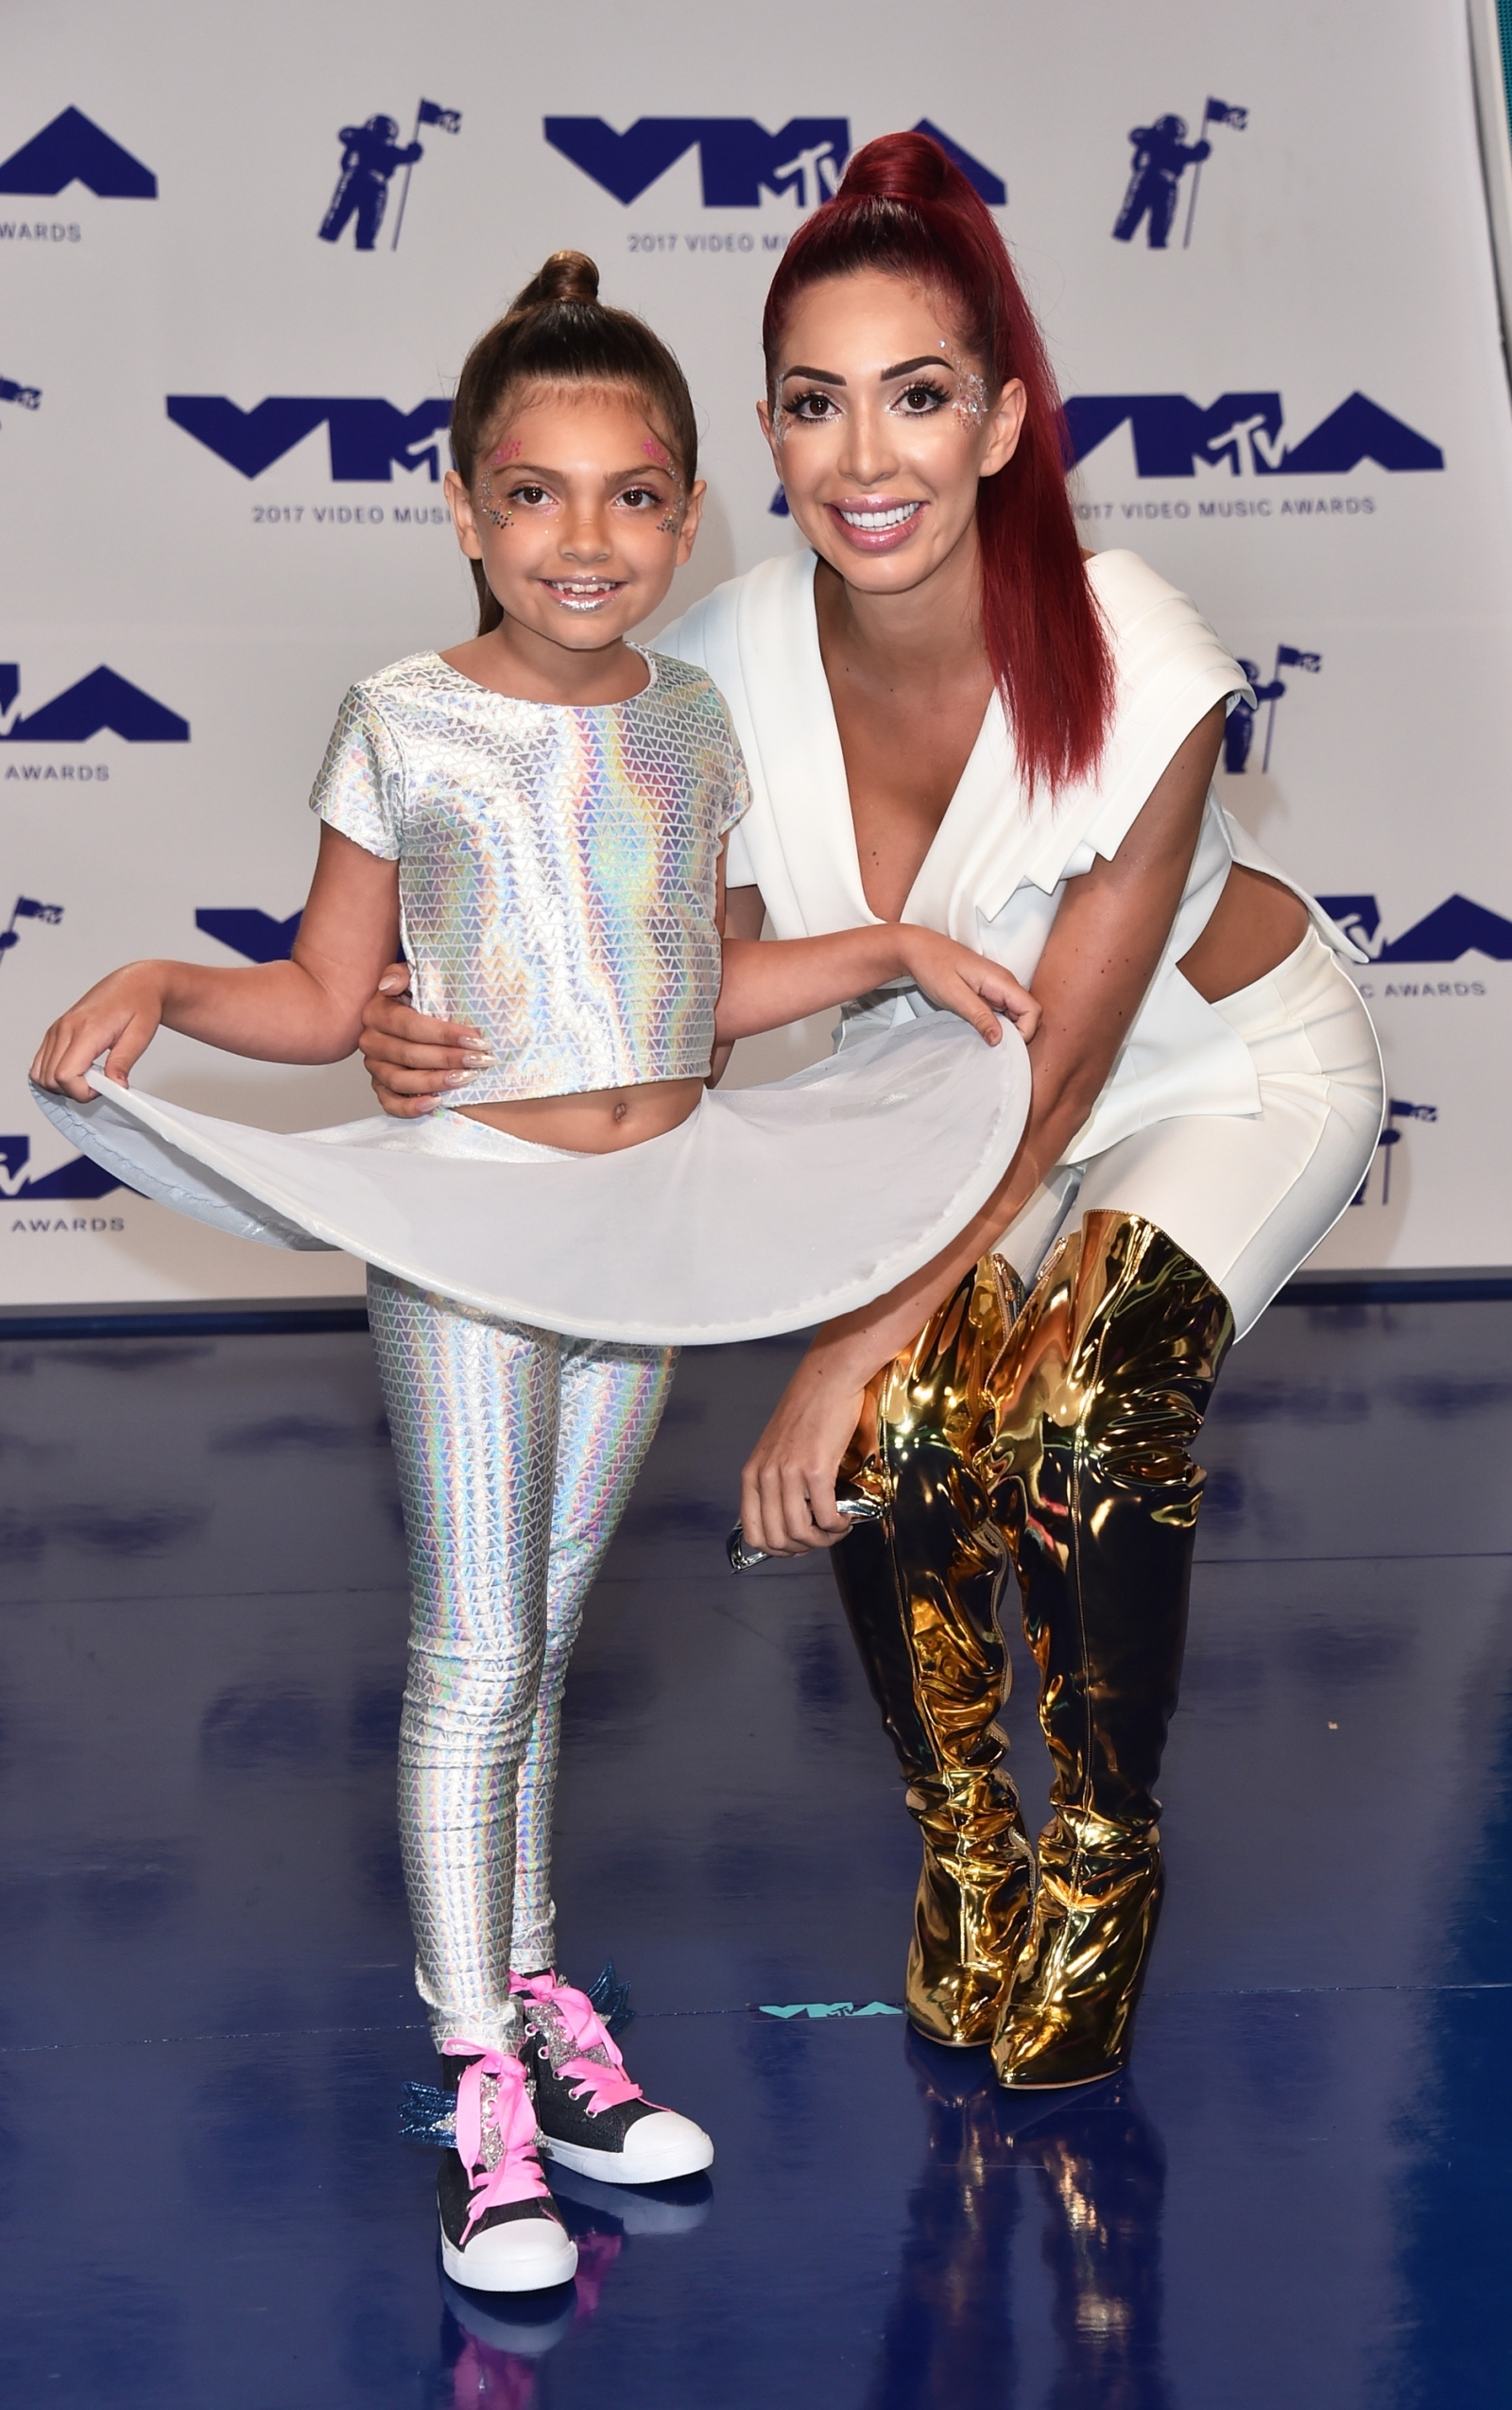 'Stop pimping out your kid': Teen Mom fans blast Farrah Abraham for ...